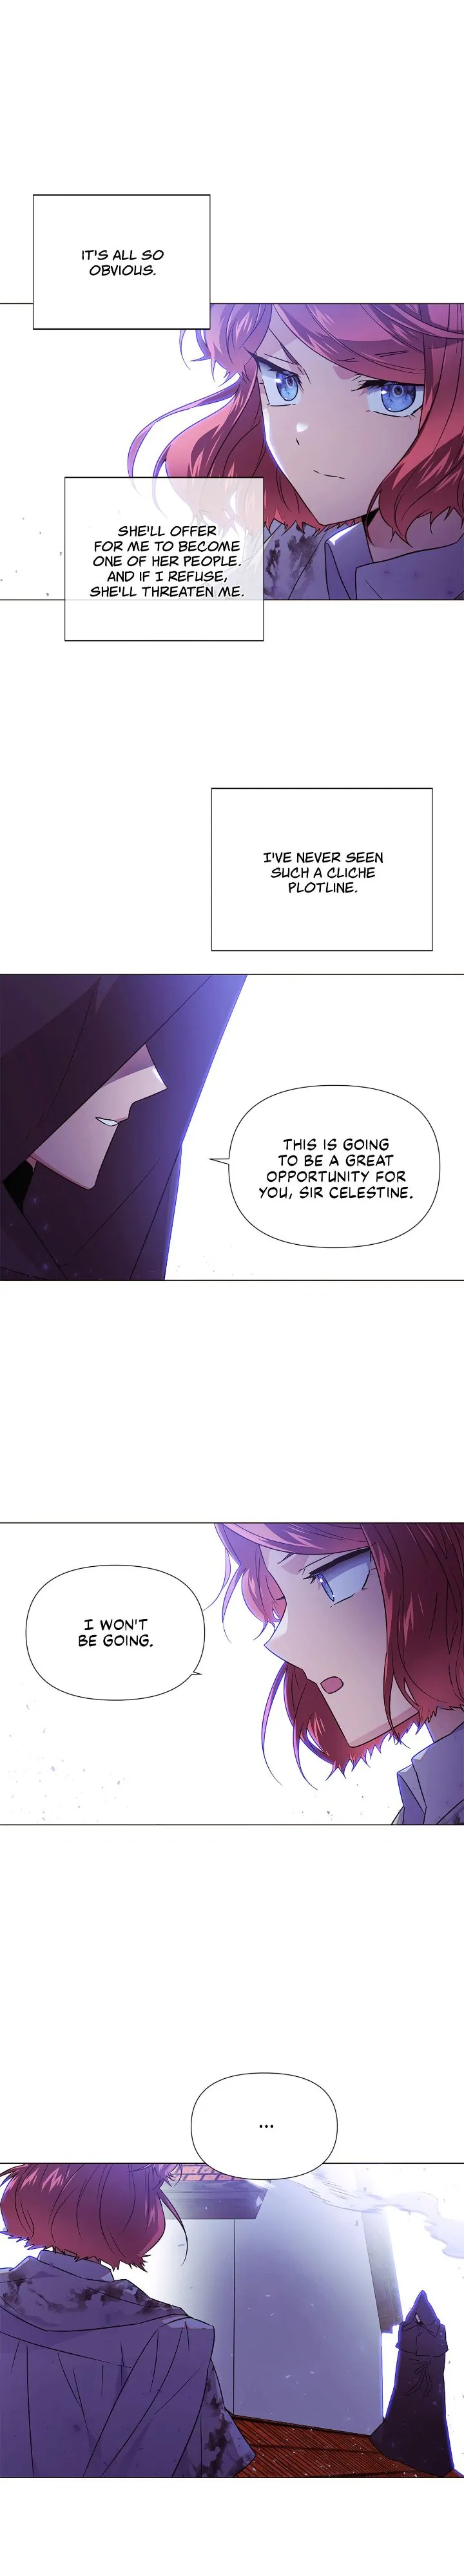 The Villain Discovered My Identity - Chapter 124 Page 20